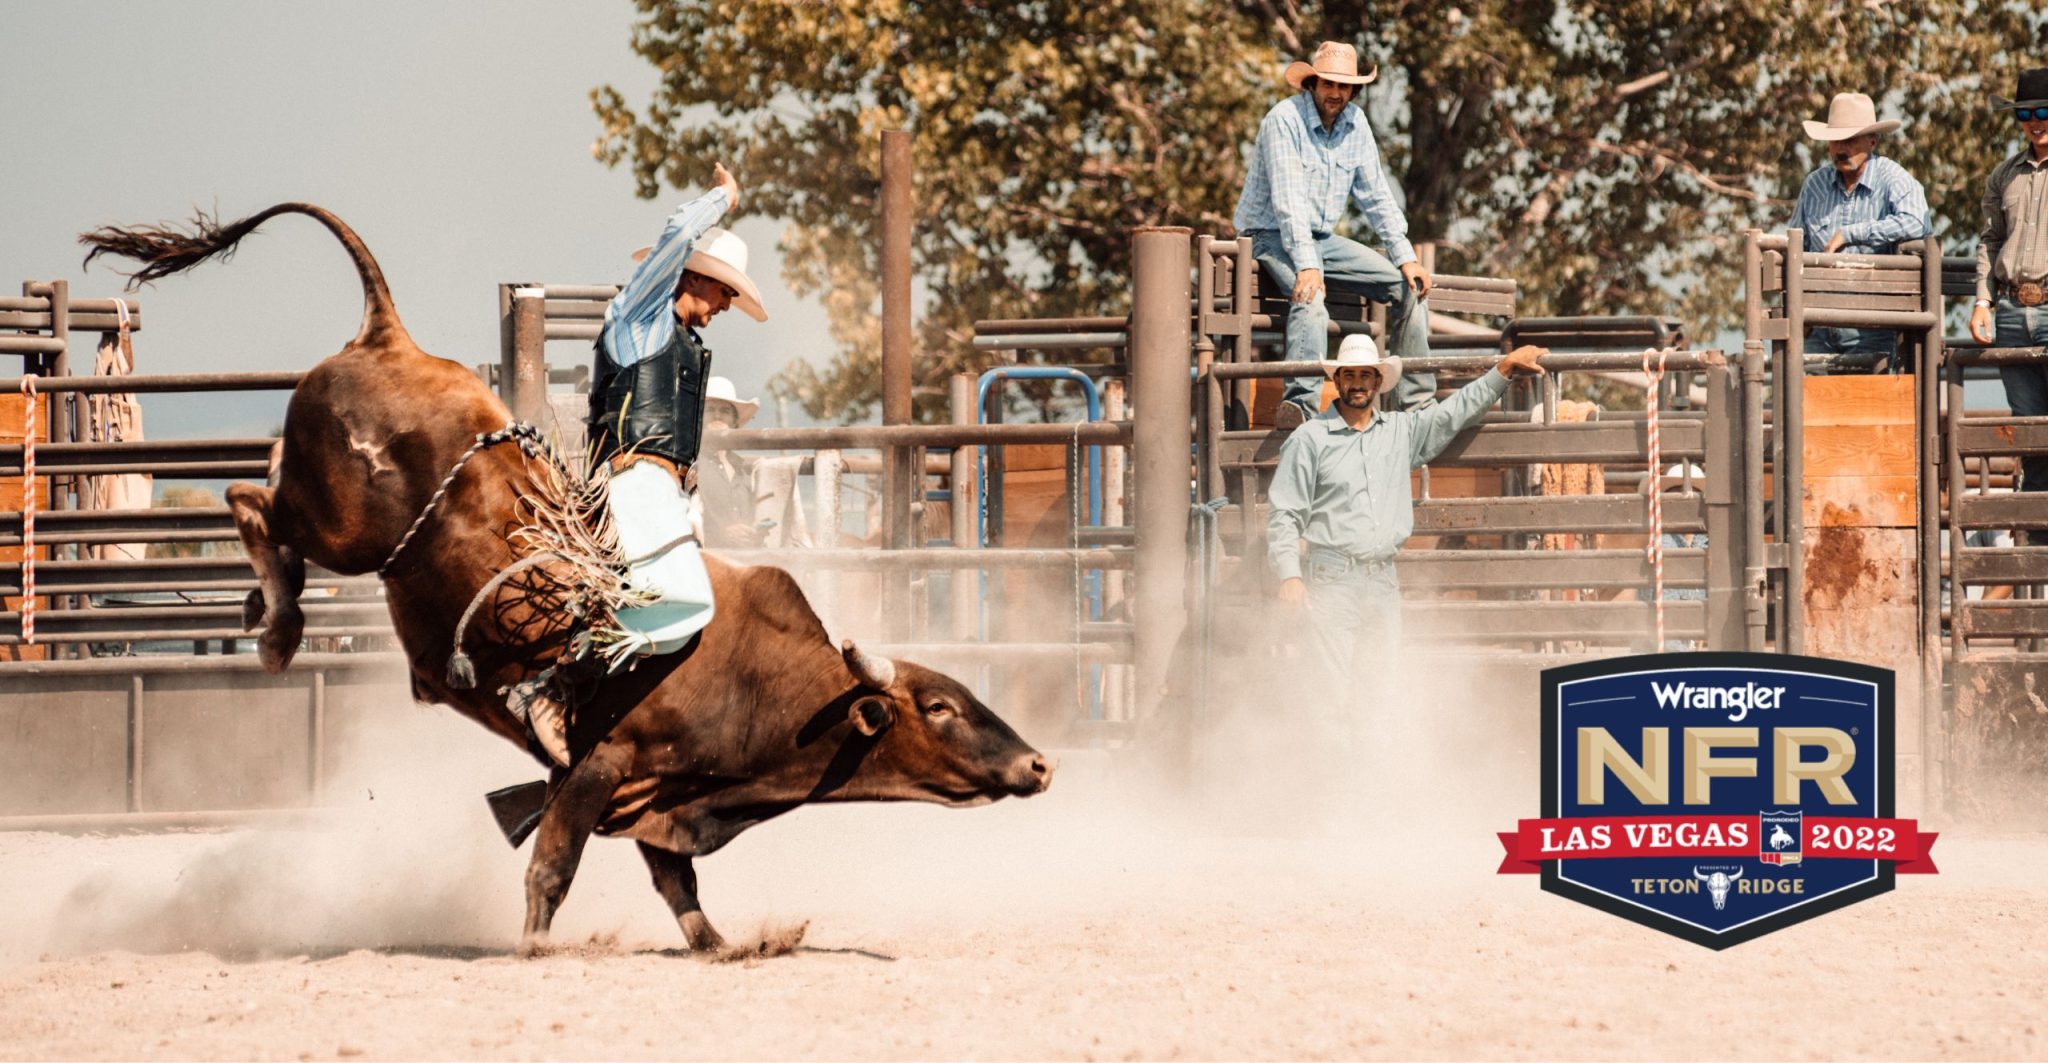 NFR hotel offer showing a guy riding a bull